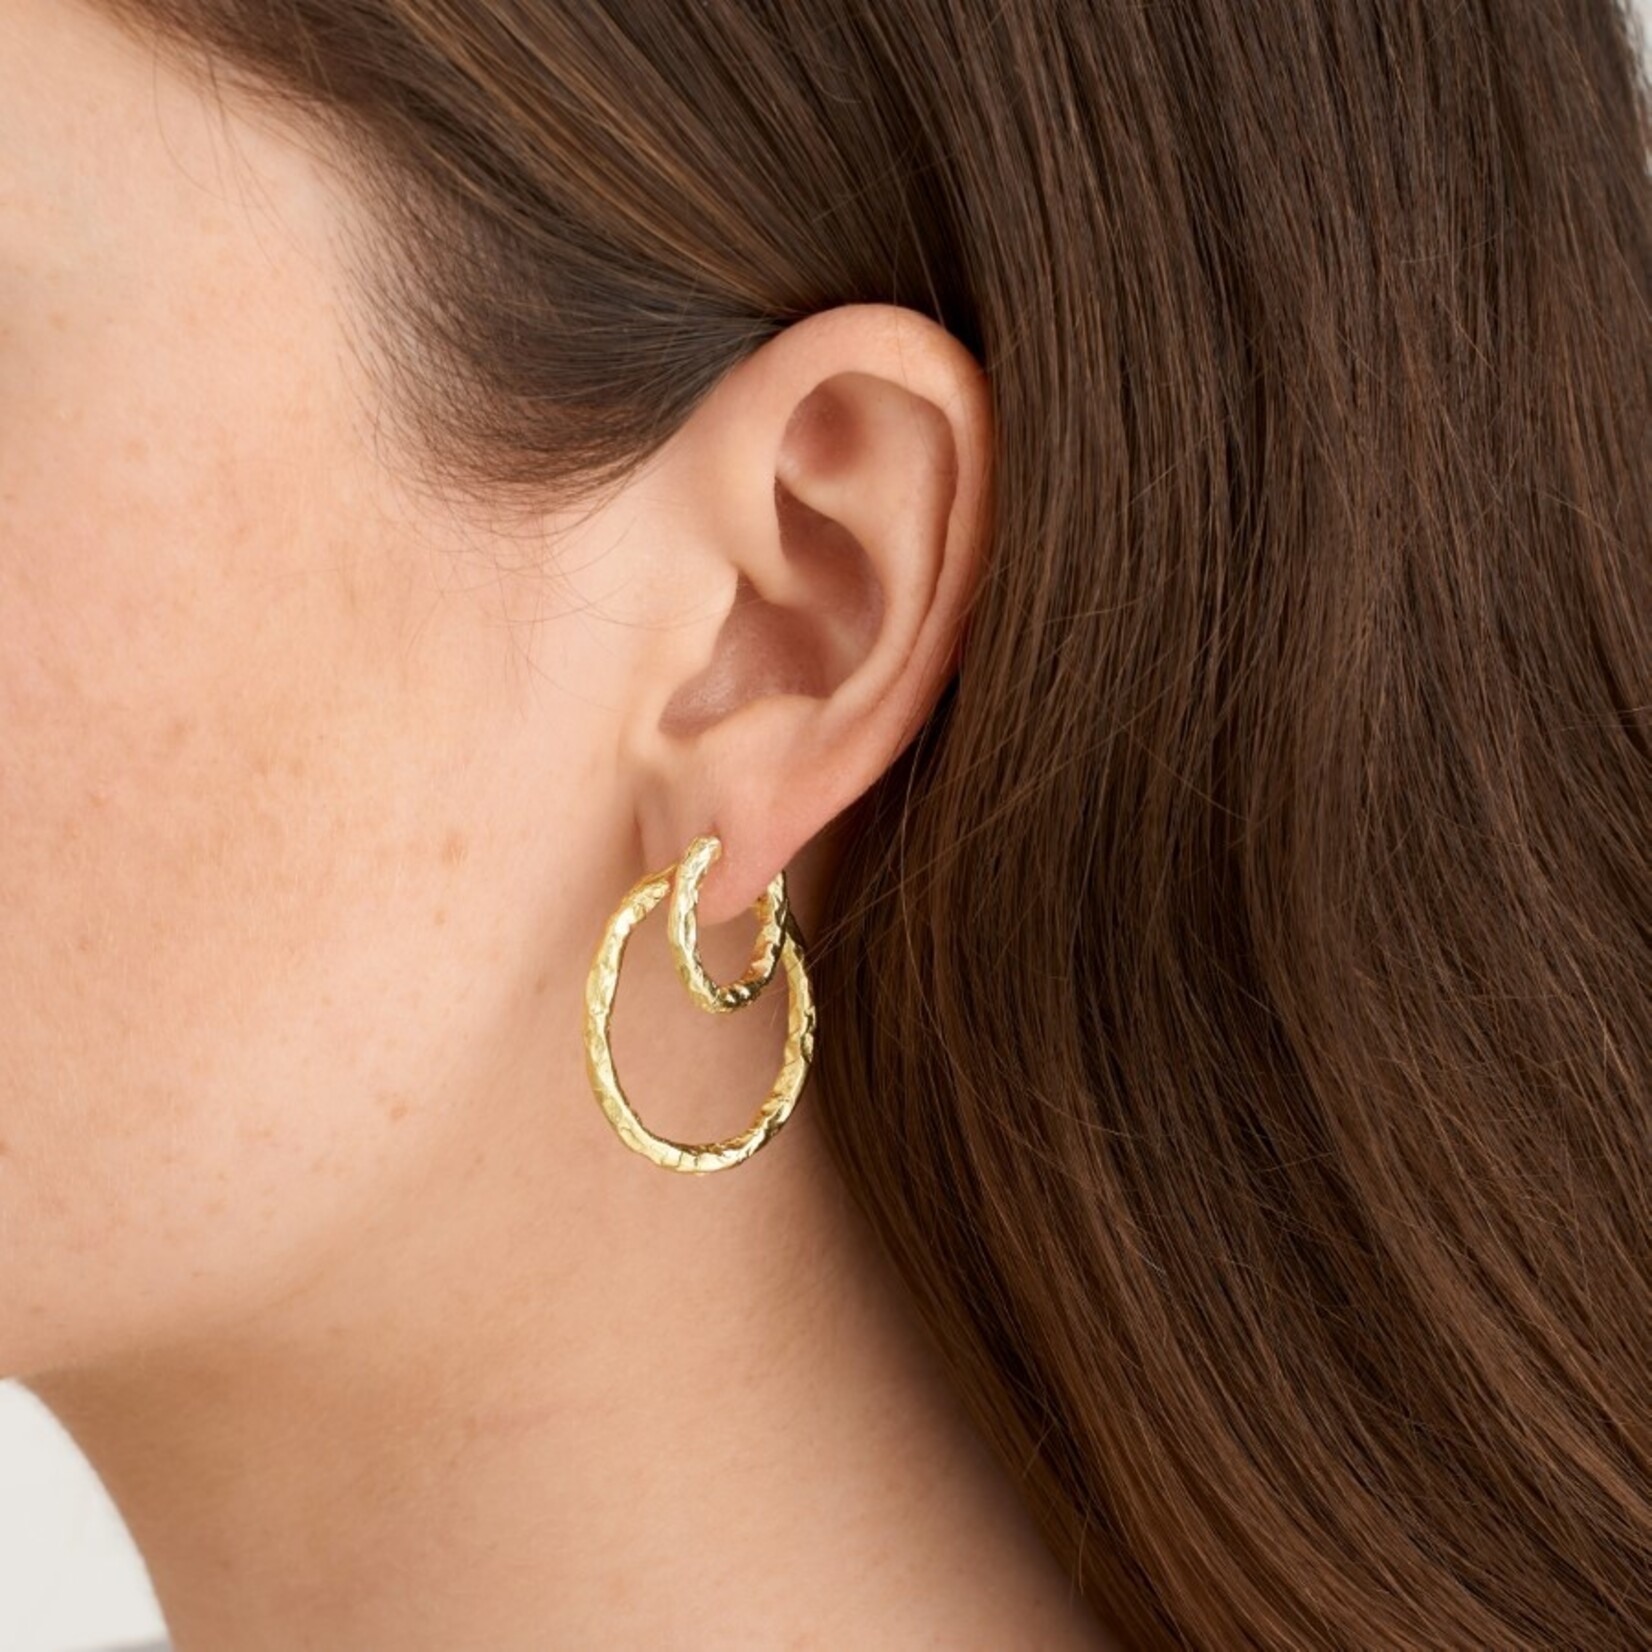 Pure by nat Earrings Hoop Foil 28mm - Gold Plated